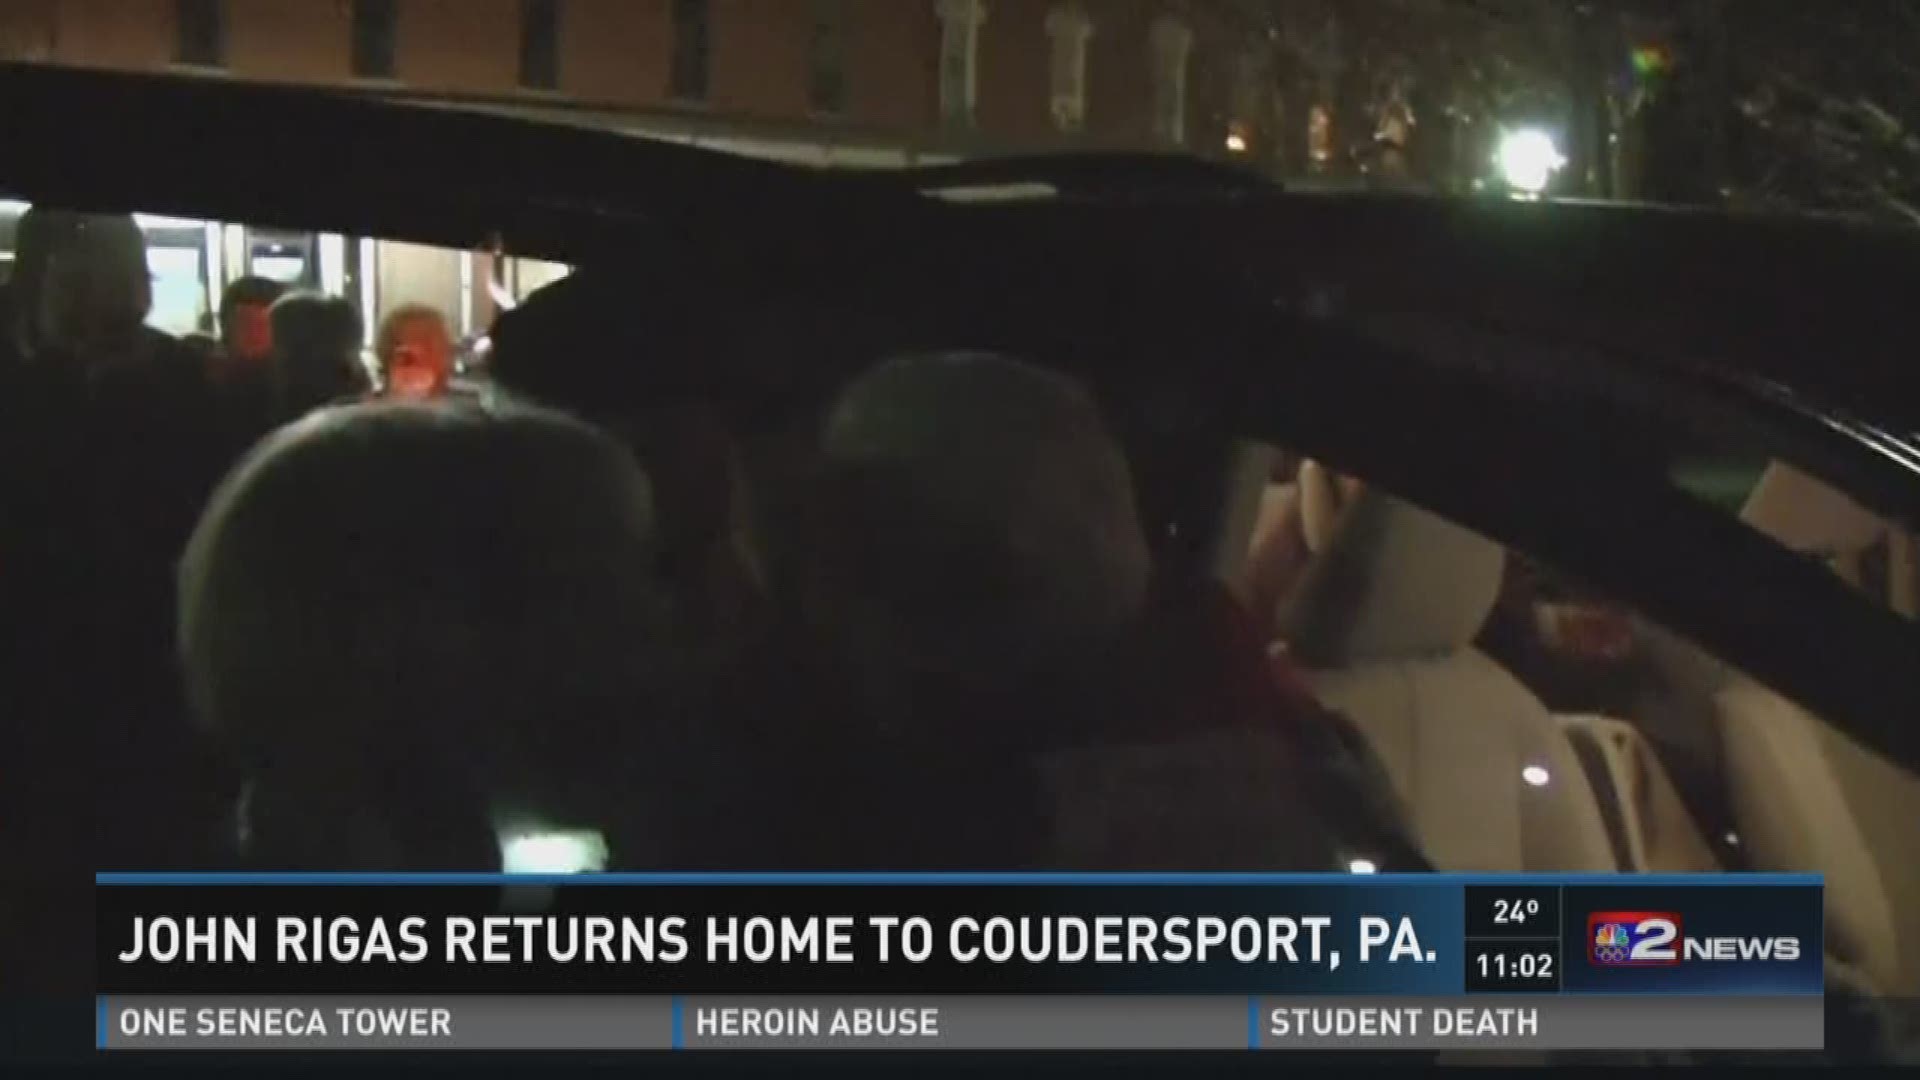 John Rigas Returns Home to Coudersport, PA